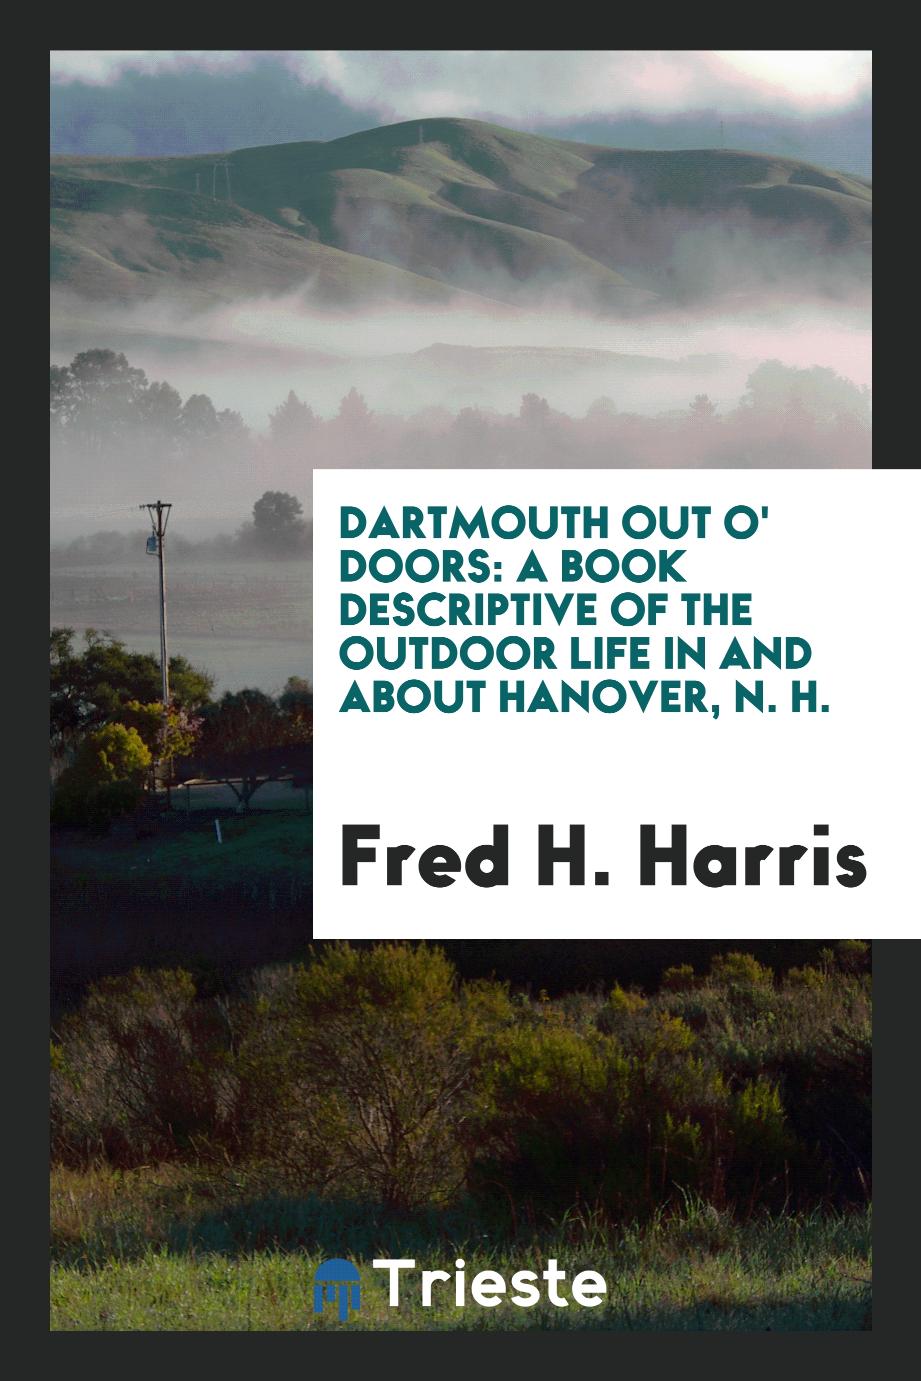 Dartmouth Out O' Doors: A Book Descriptive of the Outdoor Life in and About Hanover, N. H.